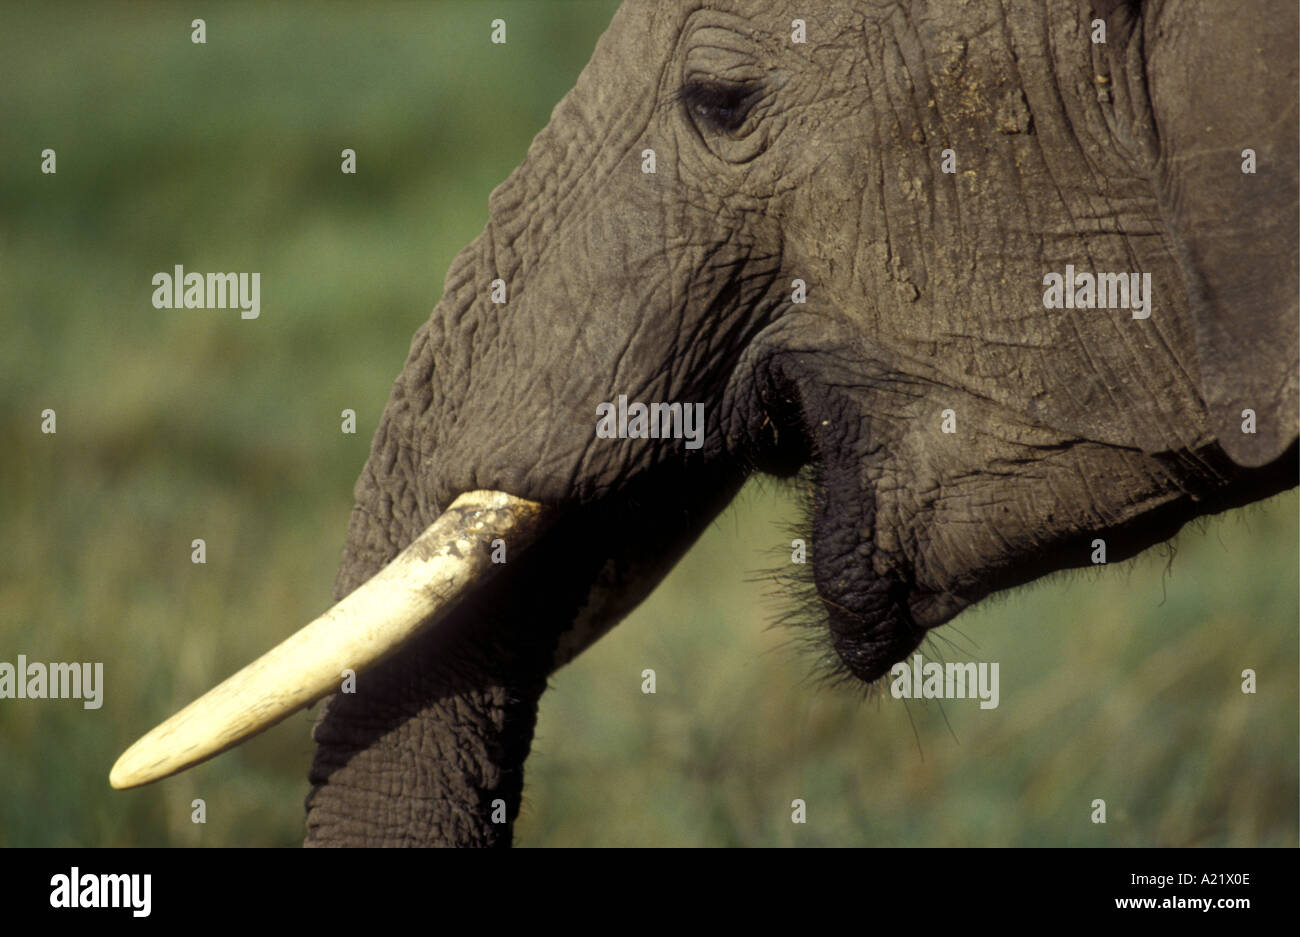 Close up profile of African elephants face Stock Photo